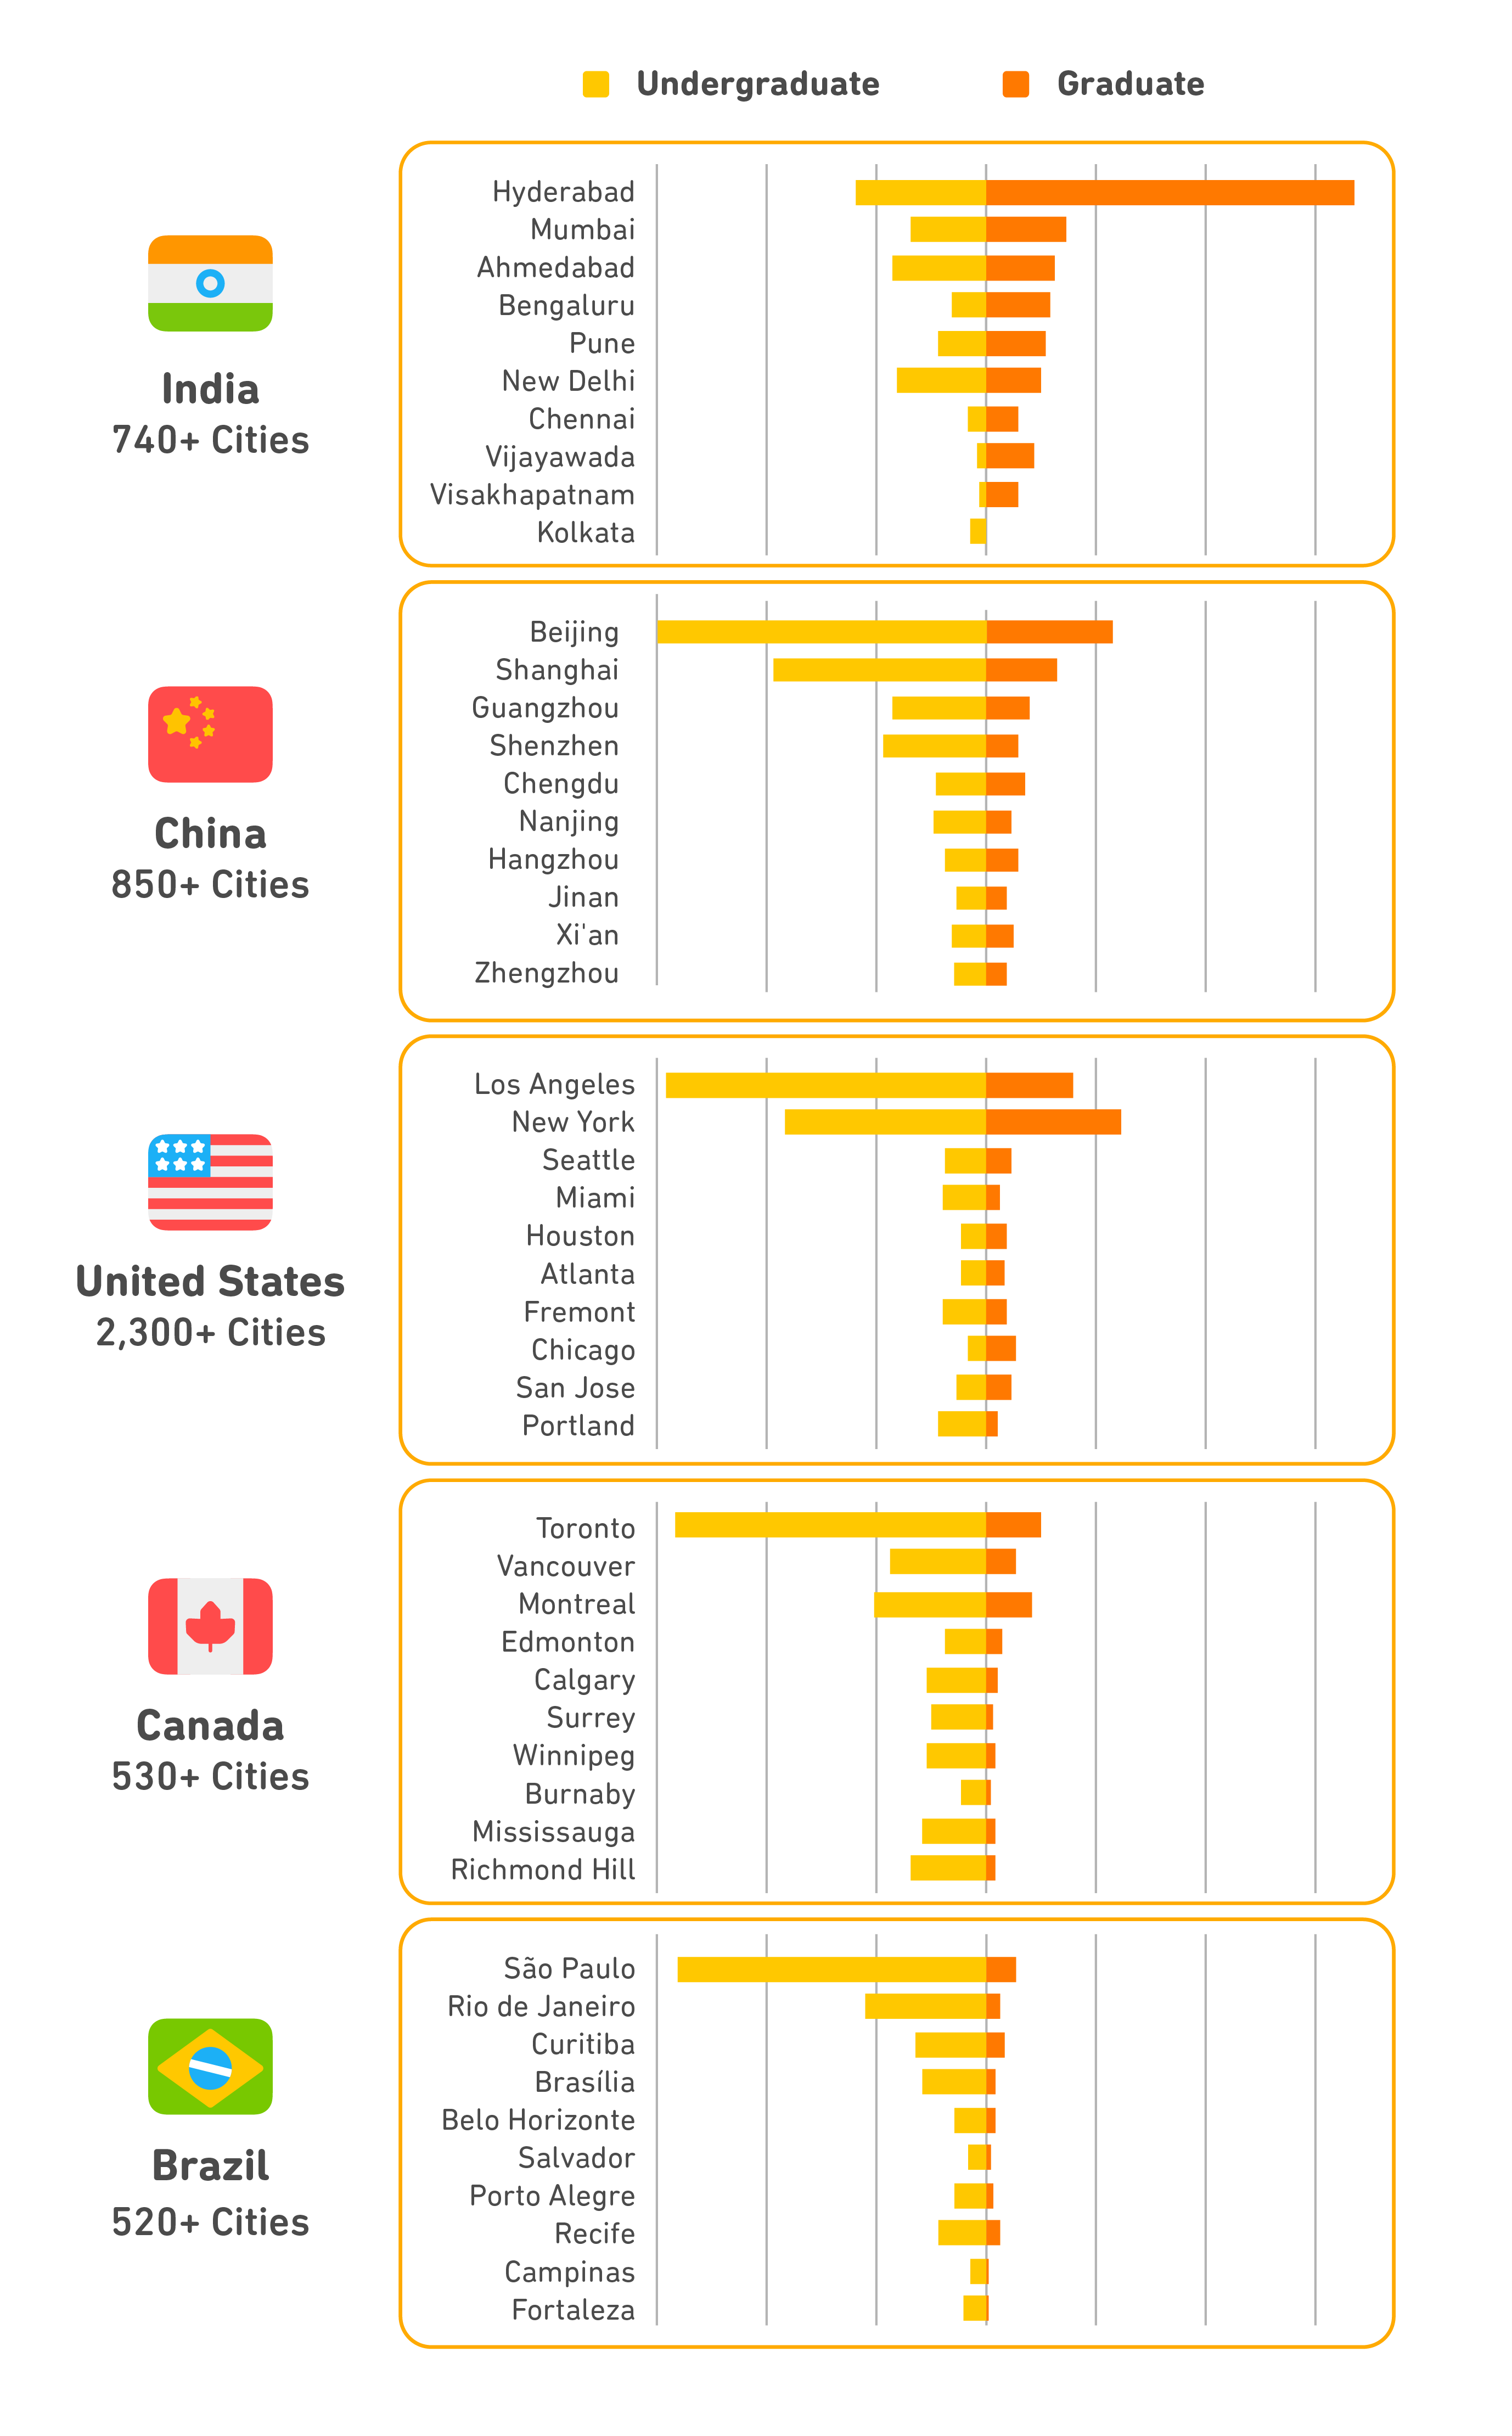 Charts showing the top 10 cities hosting Duolingo English Test takers in India, China, the U.S., Canada and Brazil including a distribution by academic level of study by certified test shares. Distribution proportions are not comparable across countries.